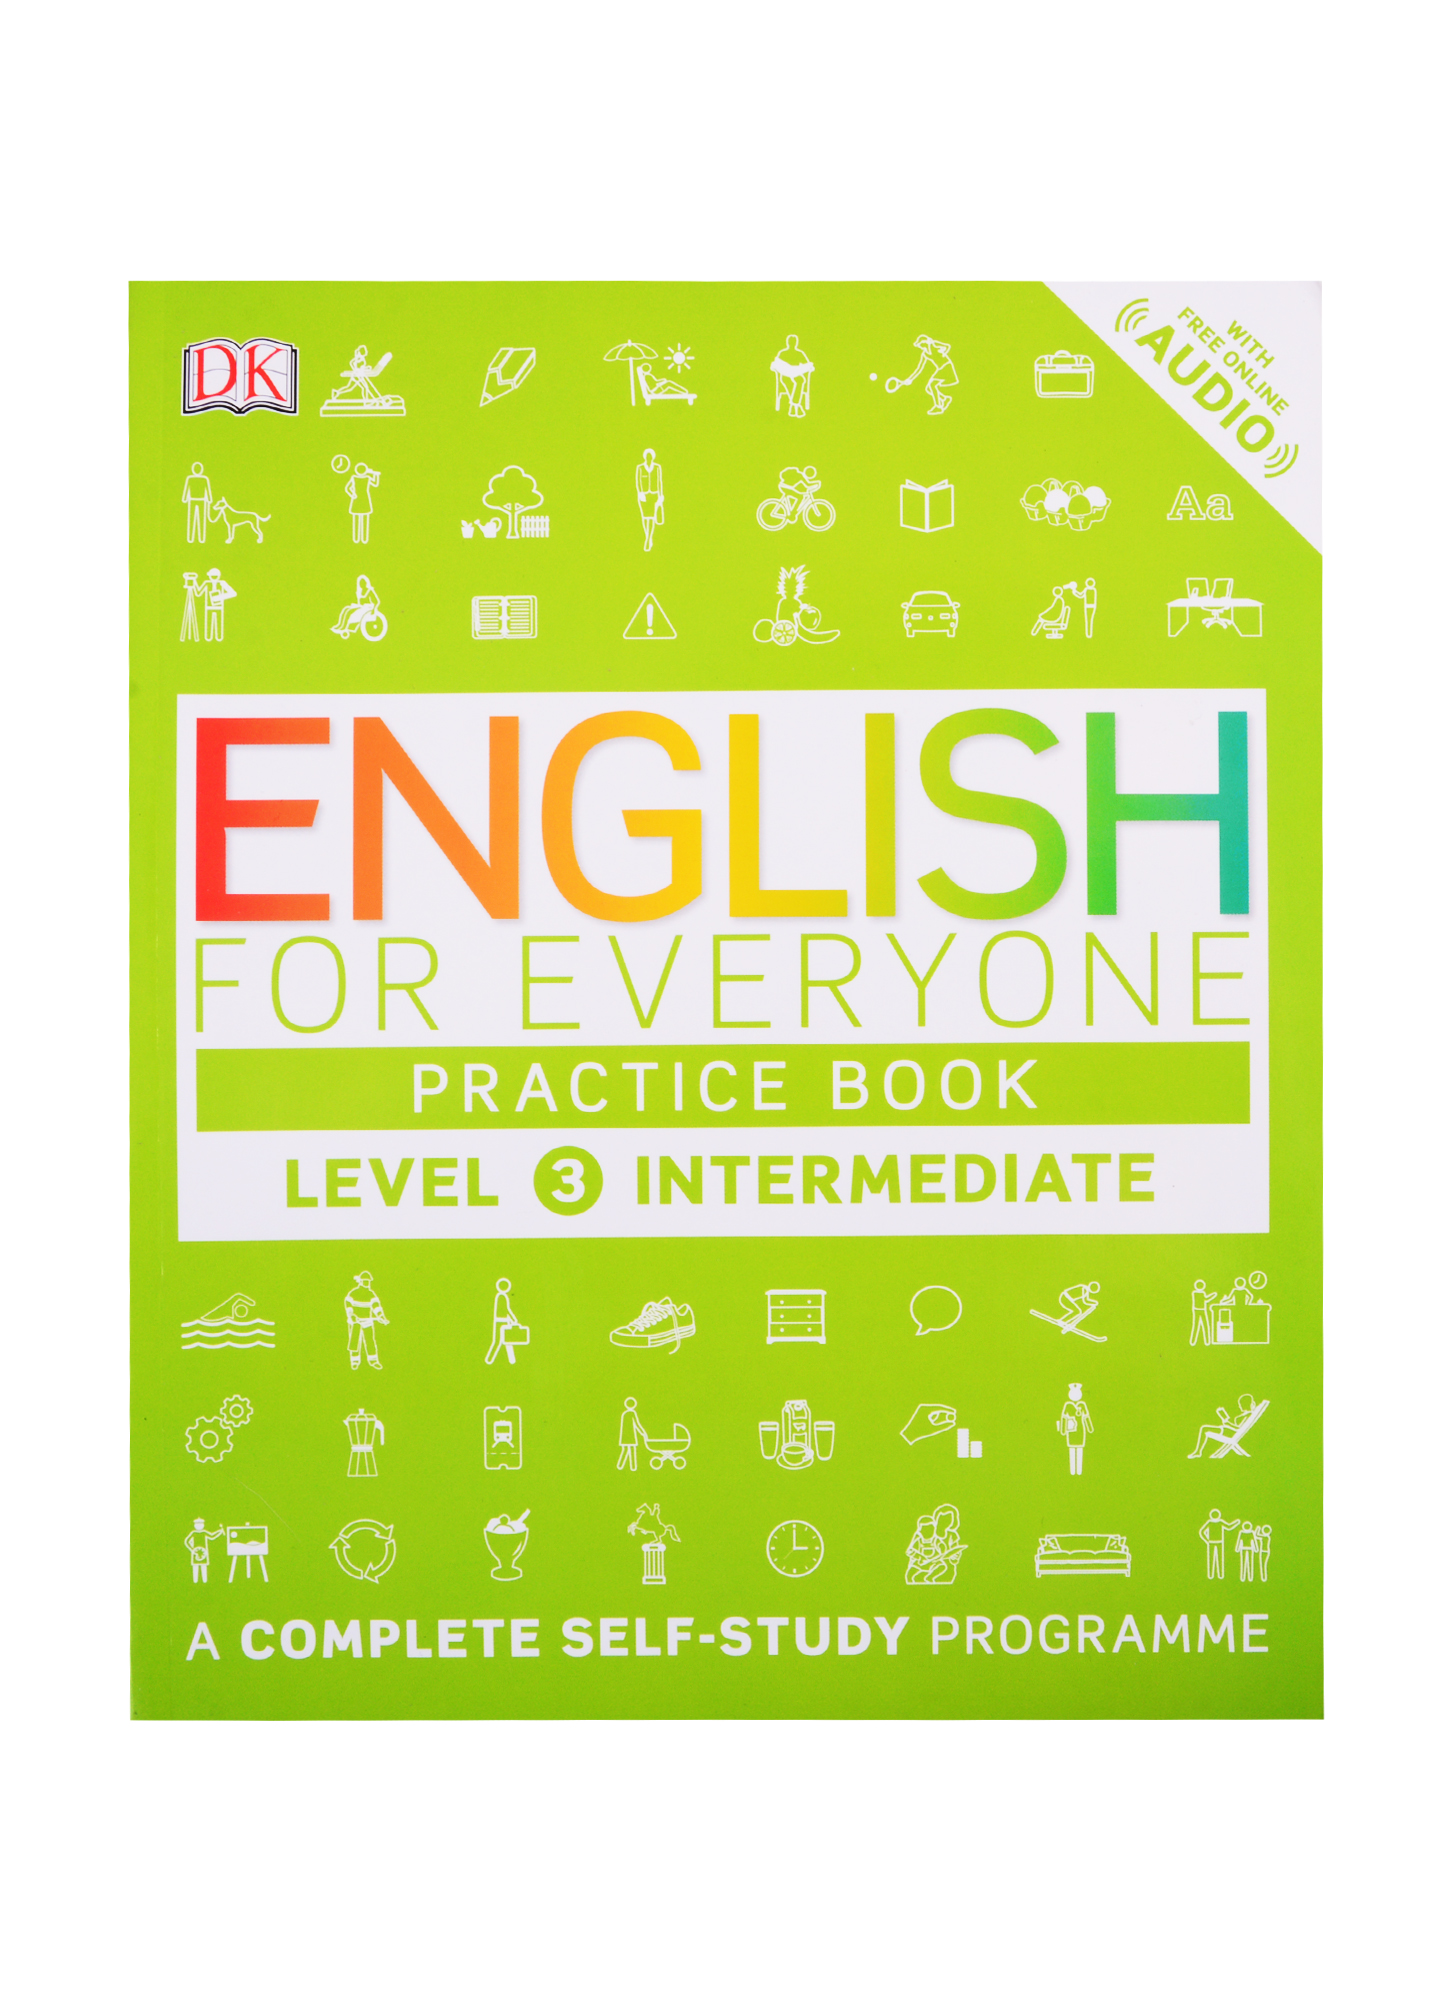 harding rachel english for everyone course book level 1 beginner a complete self study programme English for Everyone Practice Book Level 3 Intermediate